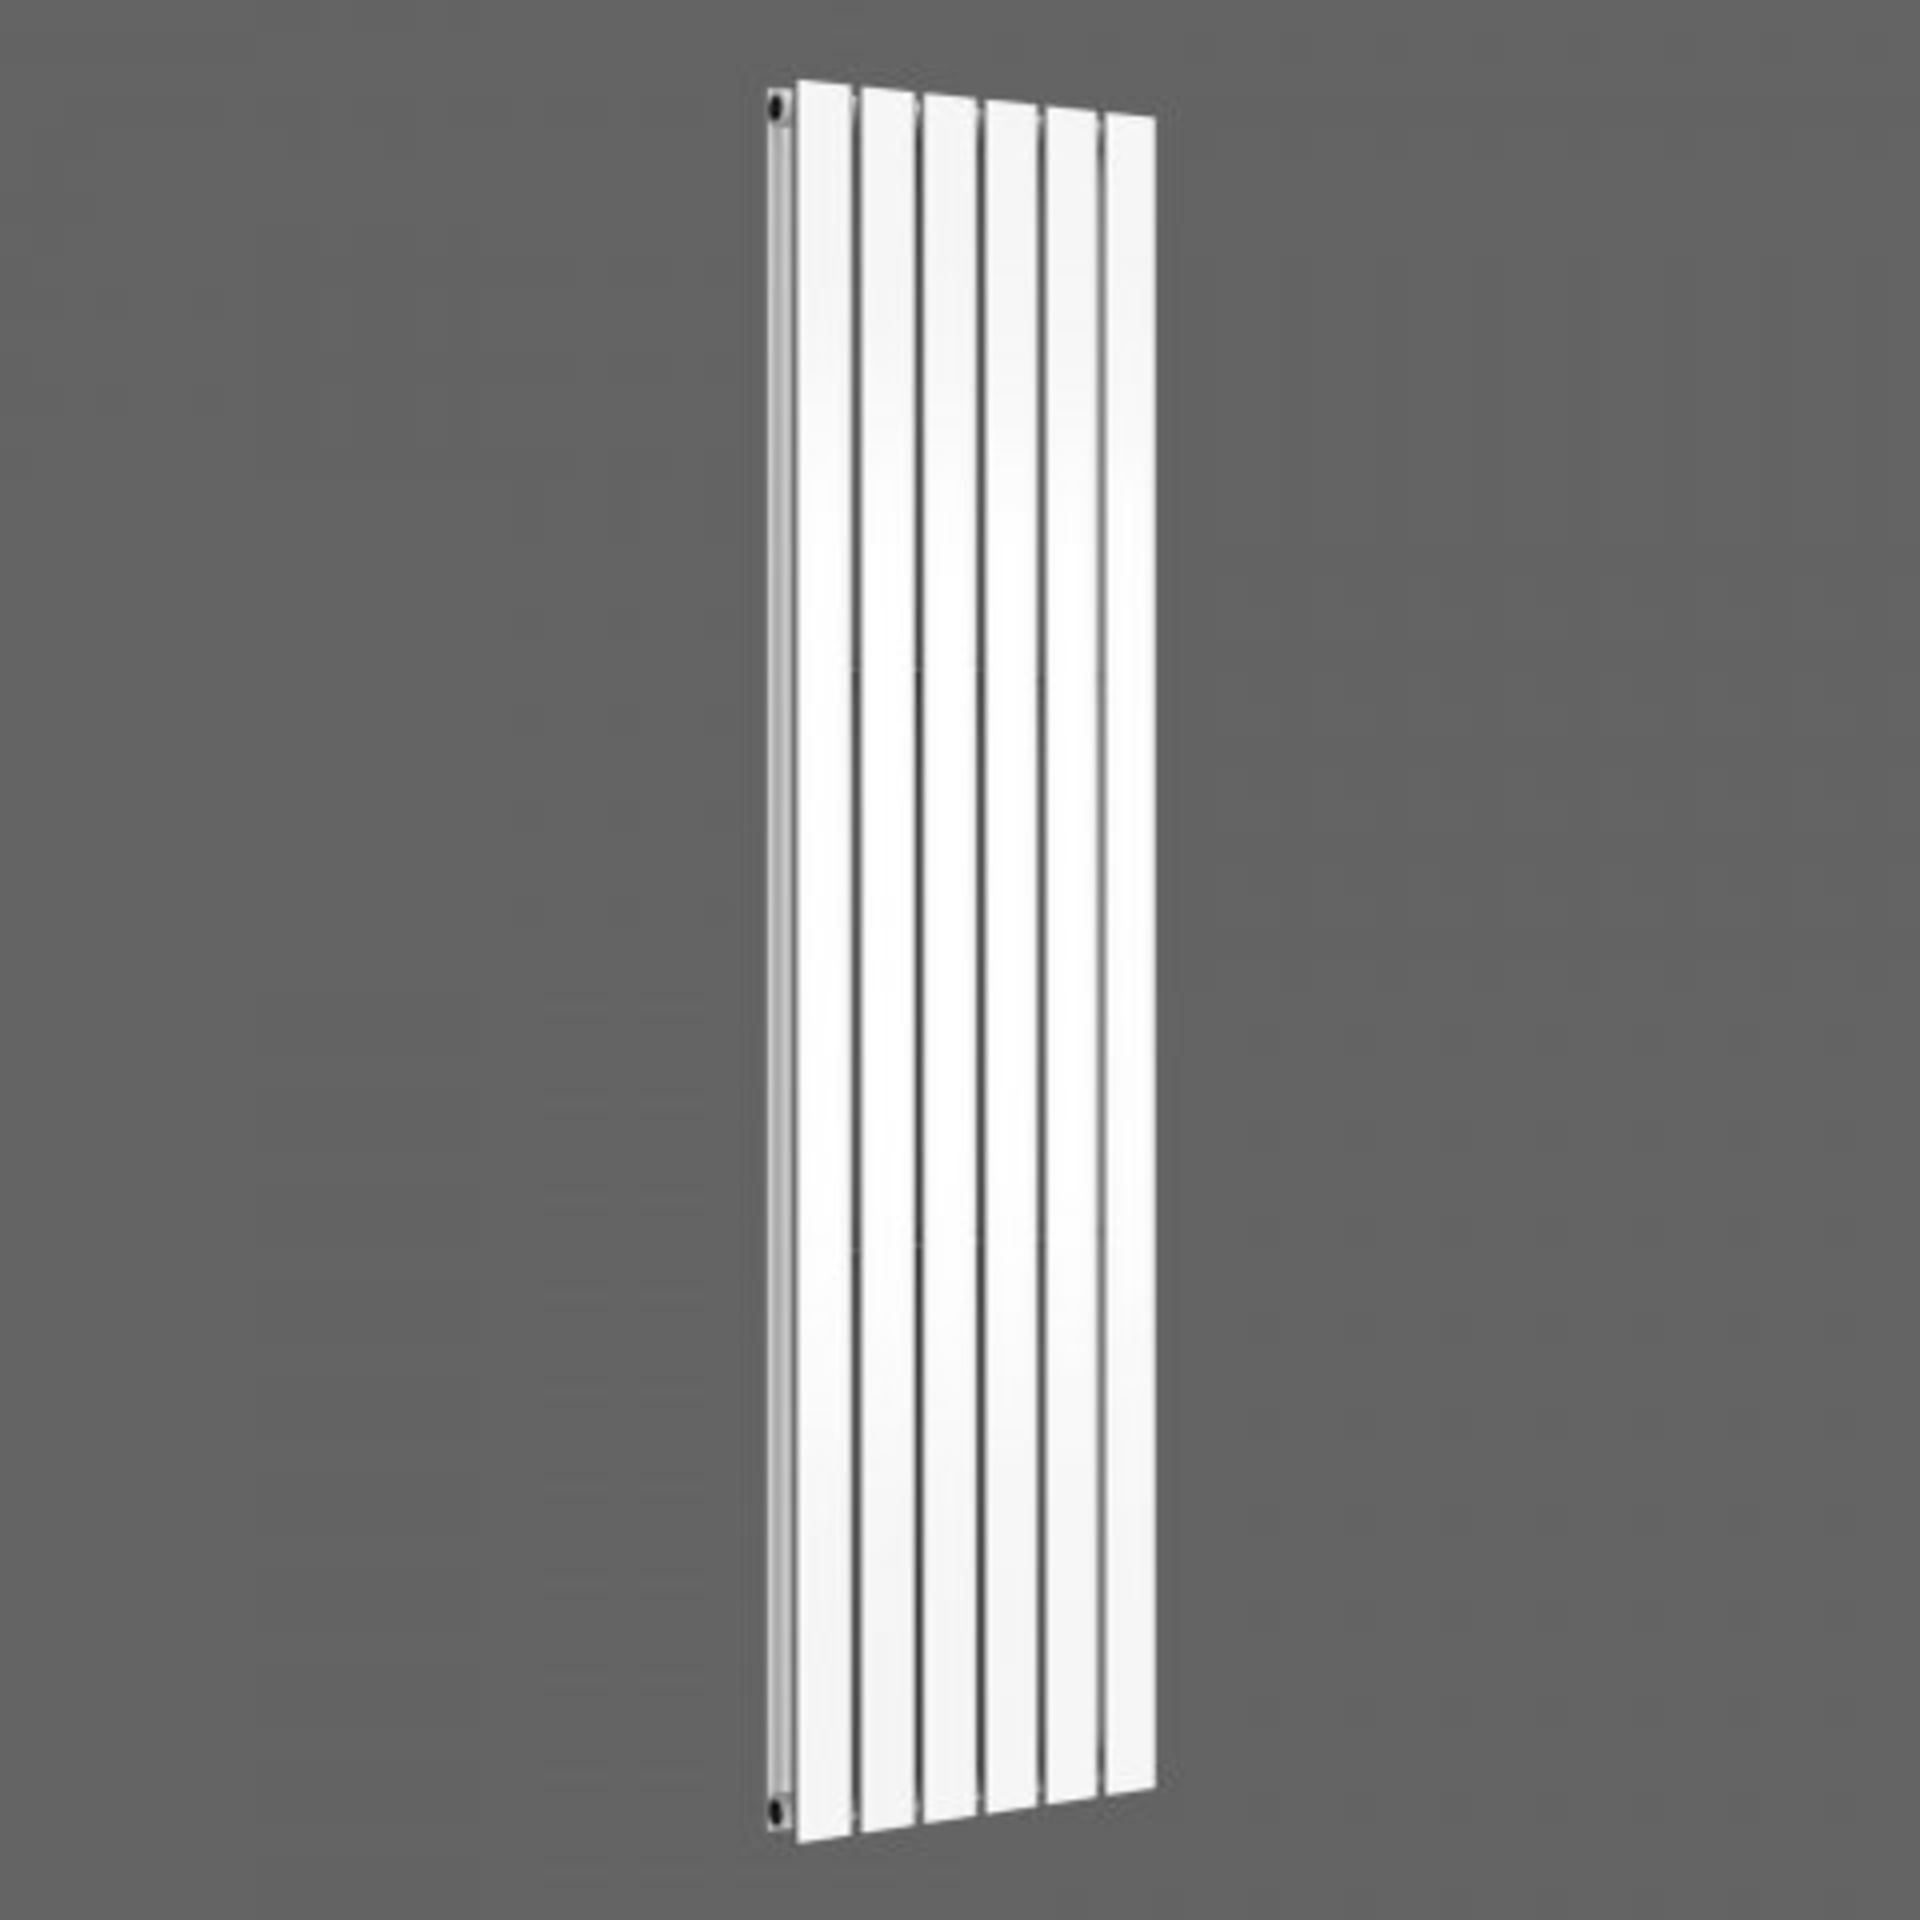 (A24) 1800x452mm Gloss White Double Flat Panel Vertical Radiator RRP £674.99. Attention to detail is - Image 2 of 3